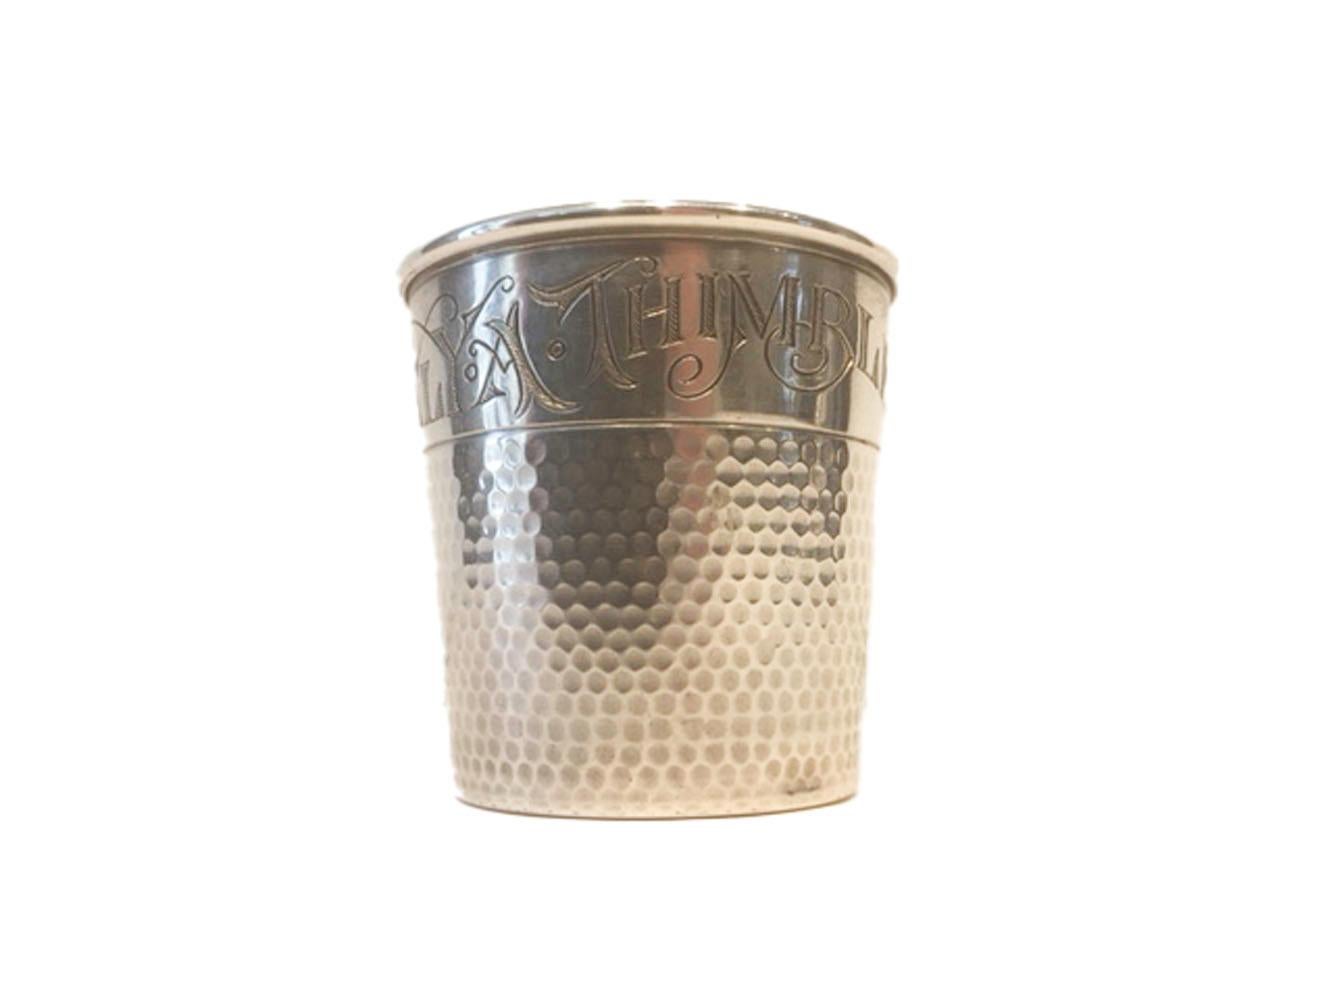 Mid-Century Modern Vintage Sterling Thimble-form Jigger by Webster Silver, ONLY A THIMBLE FULL